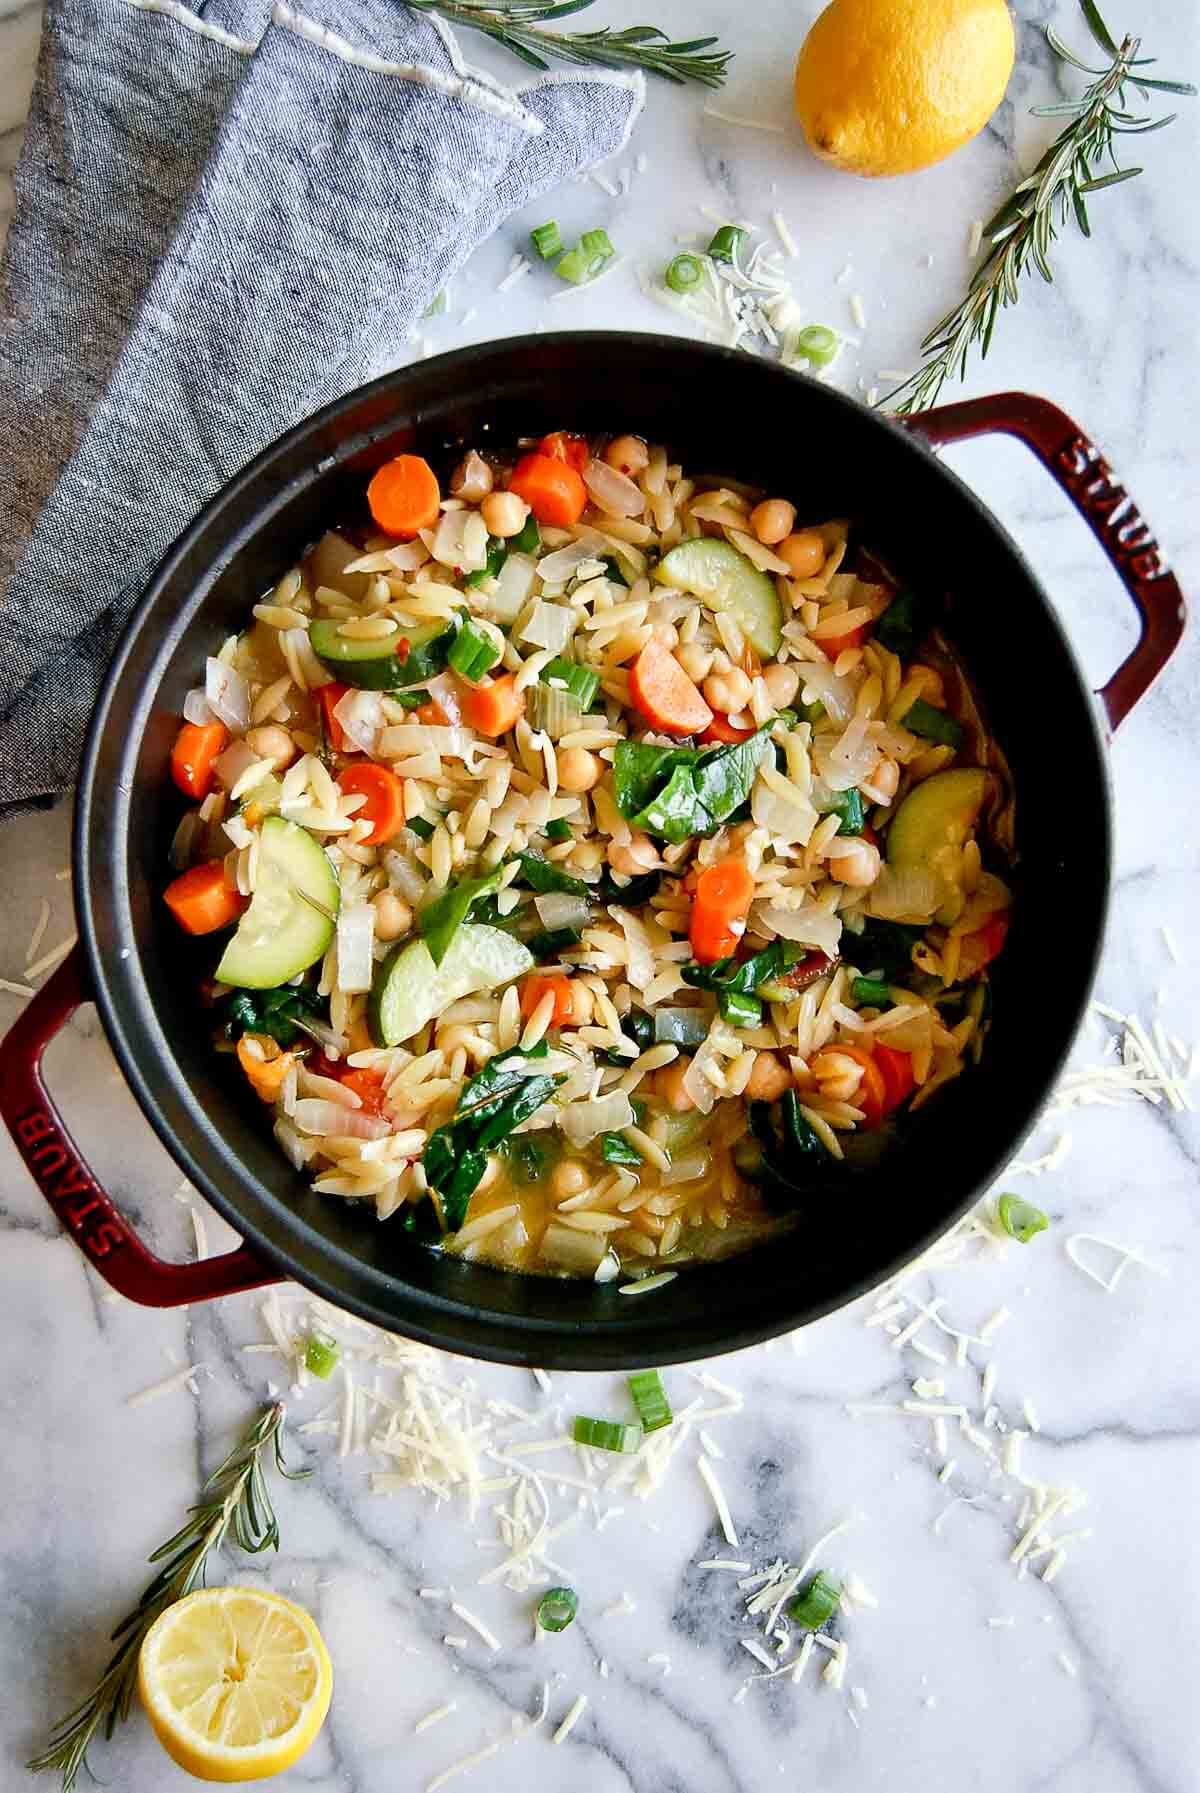 chickpea stew with orzo, veggies and greens in pot with lemons and rosemary on the sides.